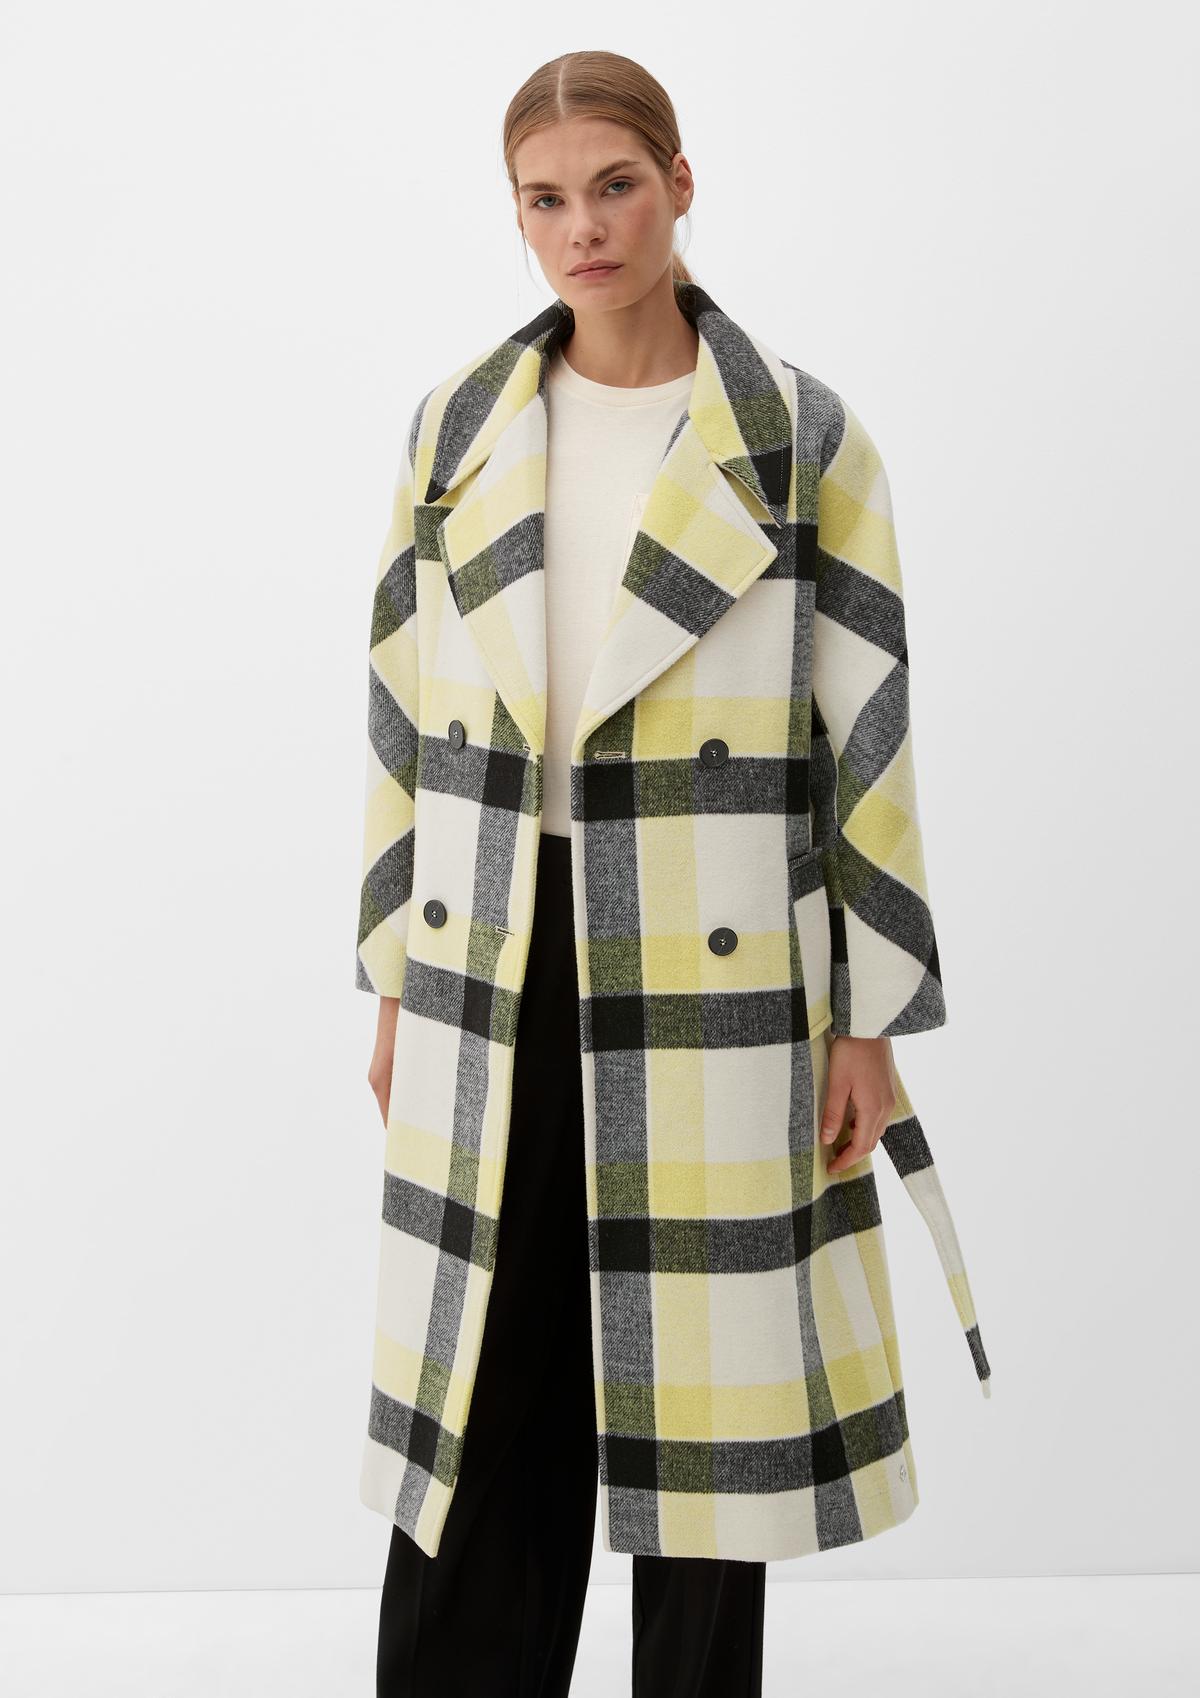 Wool blend coat in a check pattern